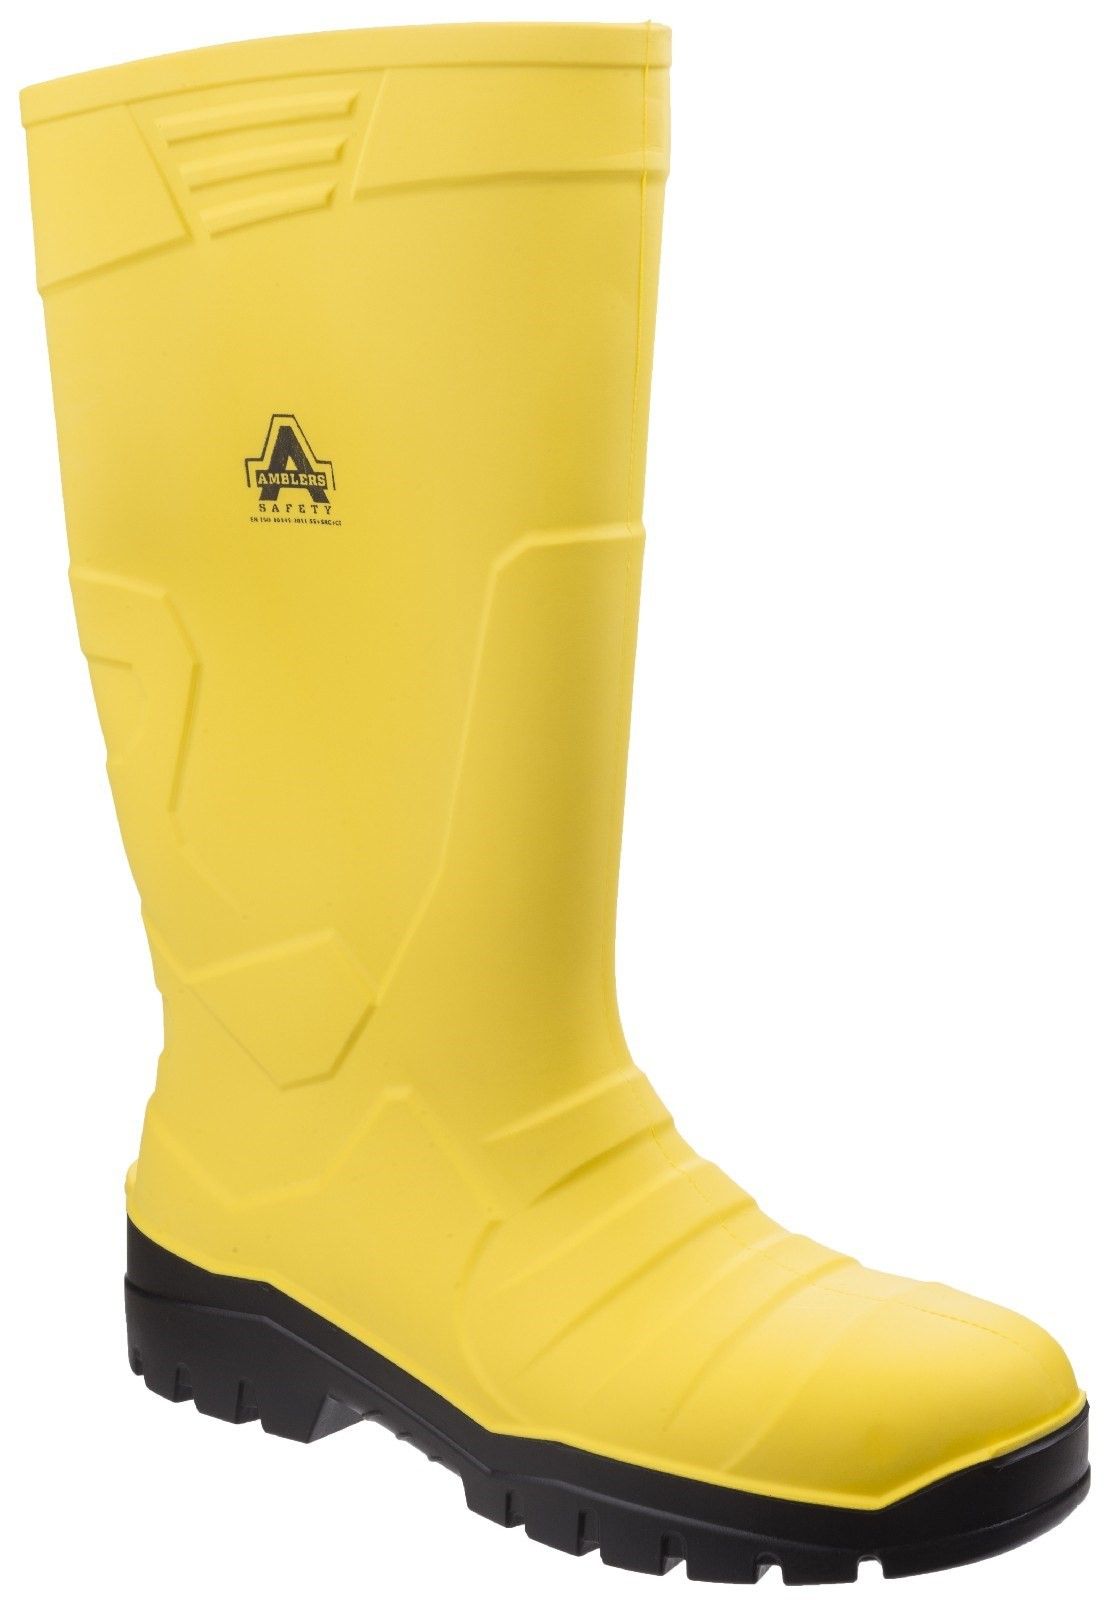 LIGHT! STRONG! COMFORTABLE! WARM! Versatile full safety wellington featuring S5 safety components.  The uppers are expertly designed to enhance water run-off and internal thermal insulation protects against temperatures as low as -20 degrees c.Polyurethane textile lining. 
Thermal insulation up to -20C. 
Removable insole for extra comfort. 
Sole resistant to oils, fats, acids and organic solvents. 
Slip resistant and anti-static sole.